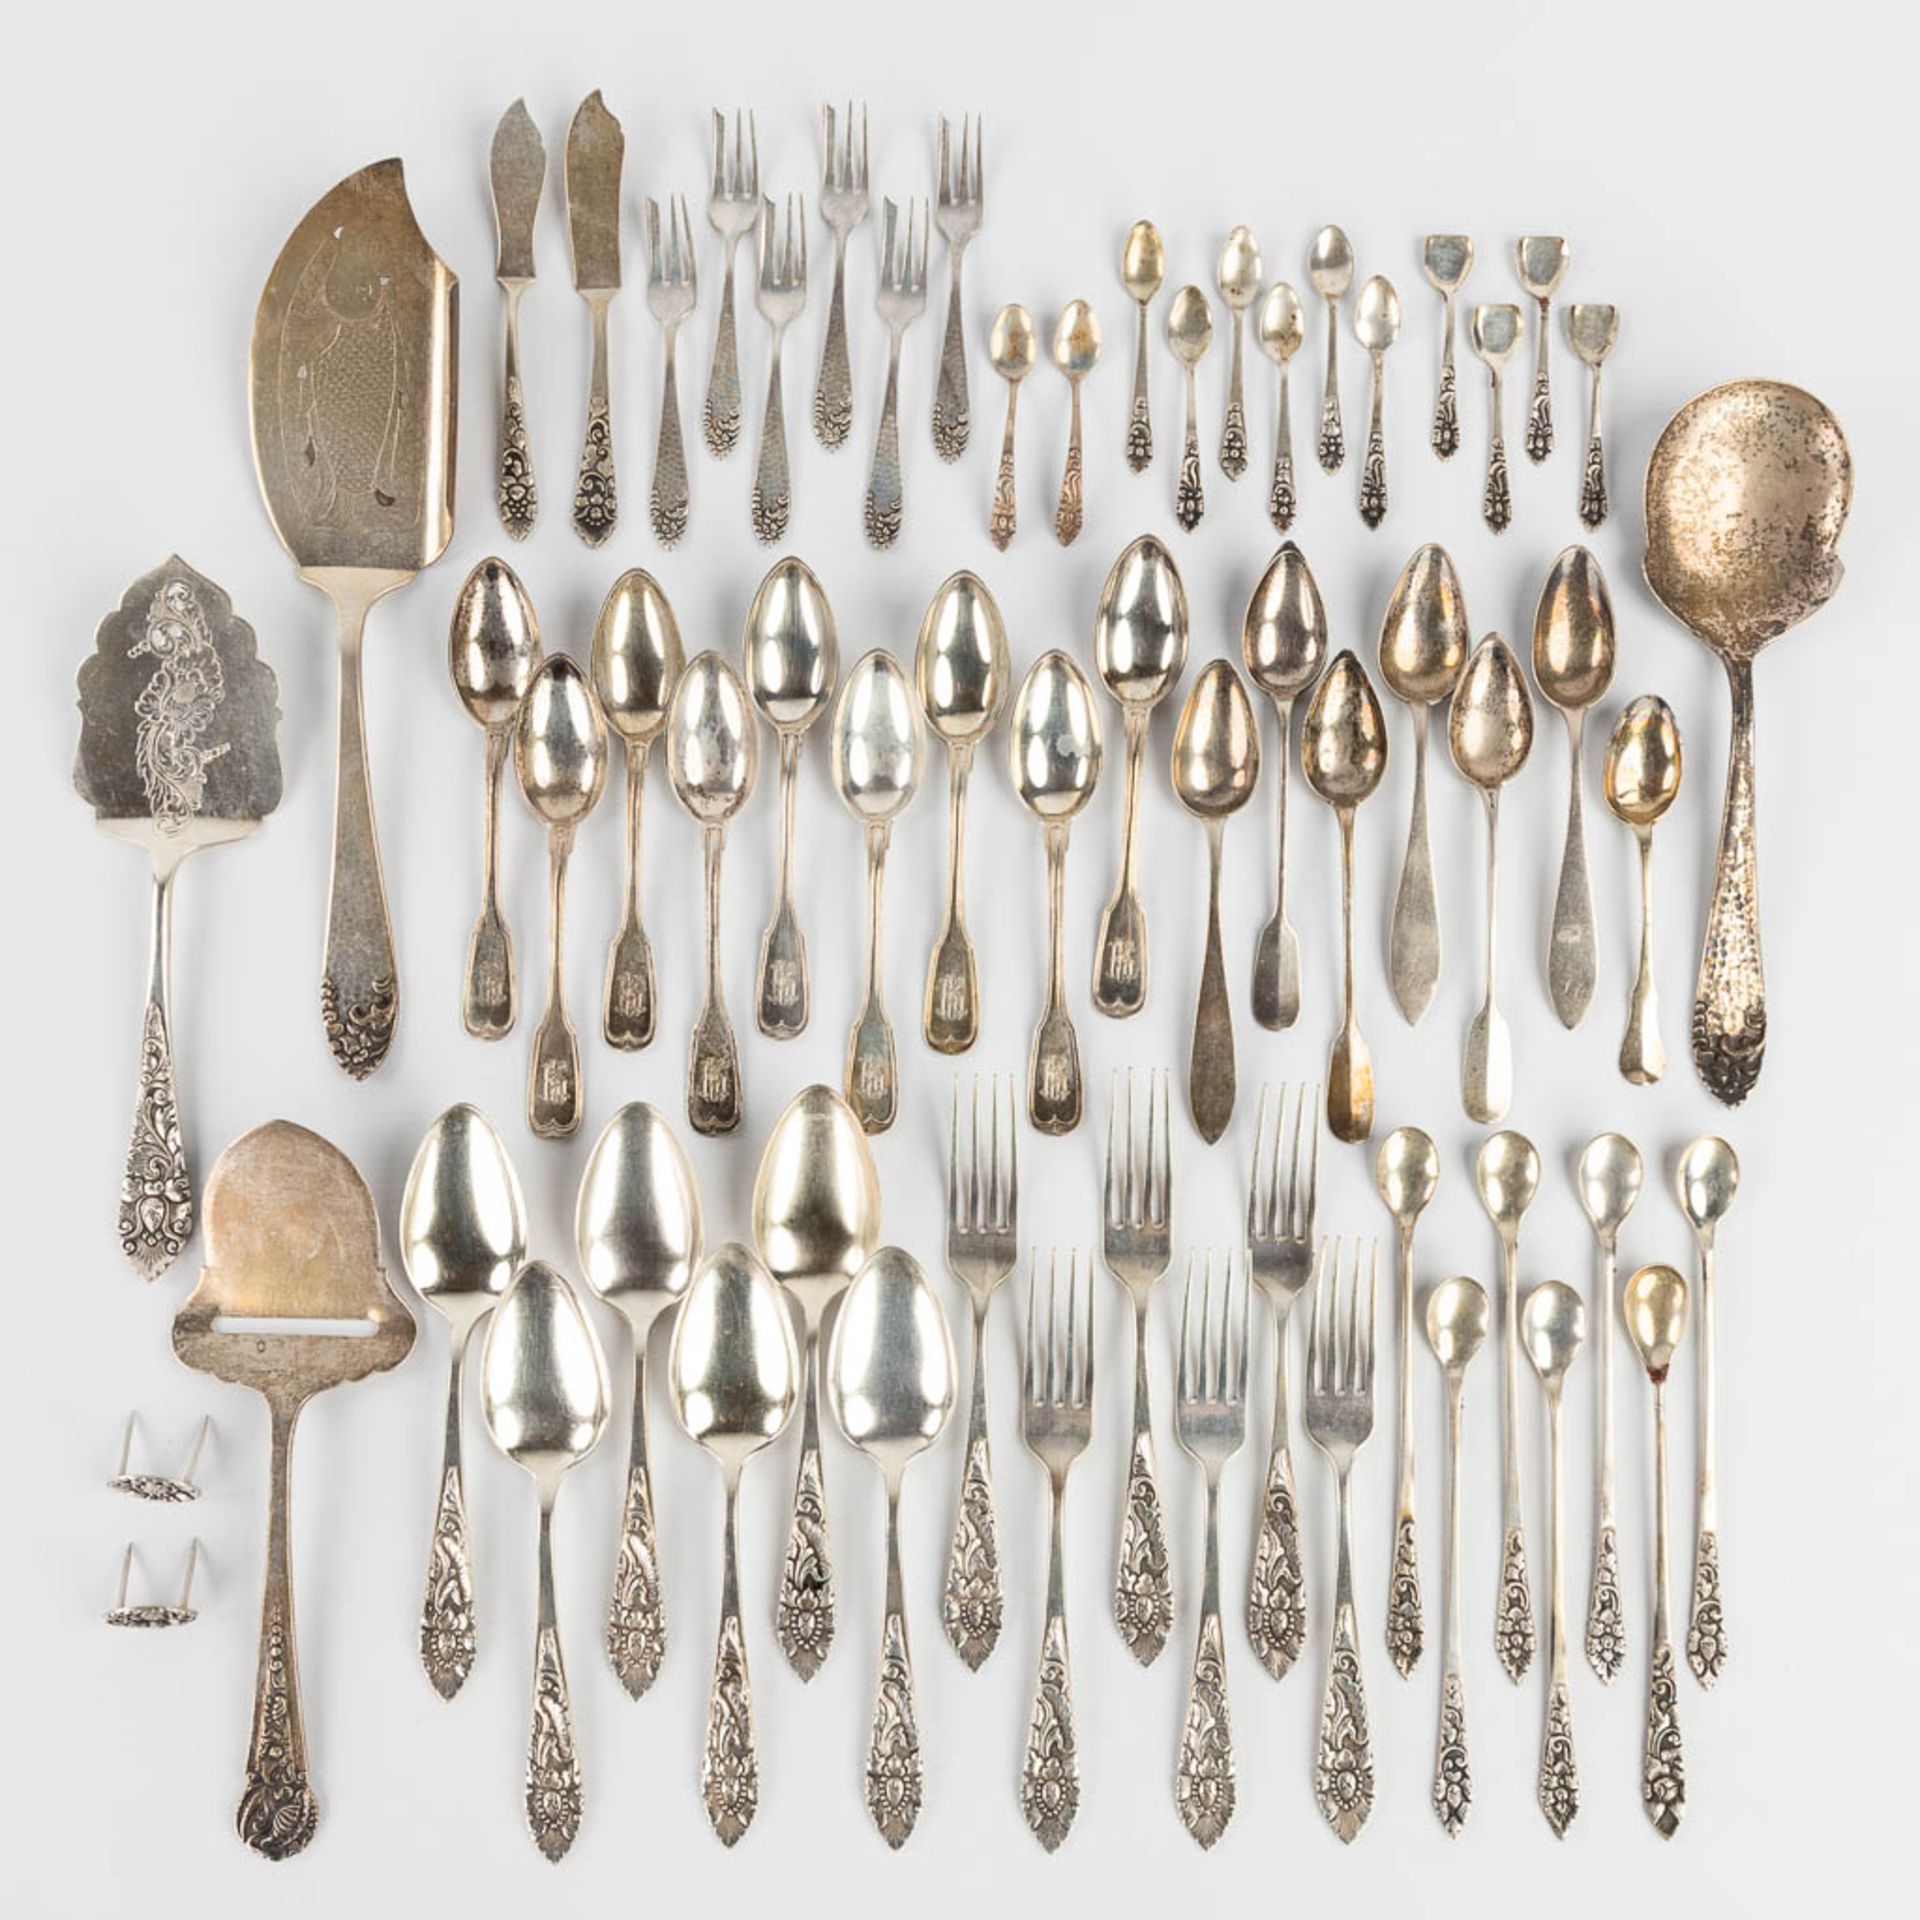 61 pieces of silver cutlery and accessories. (L:29 cm)